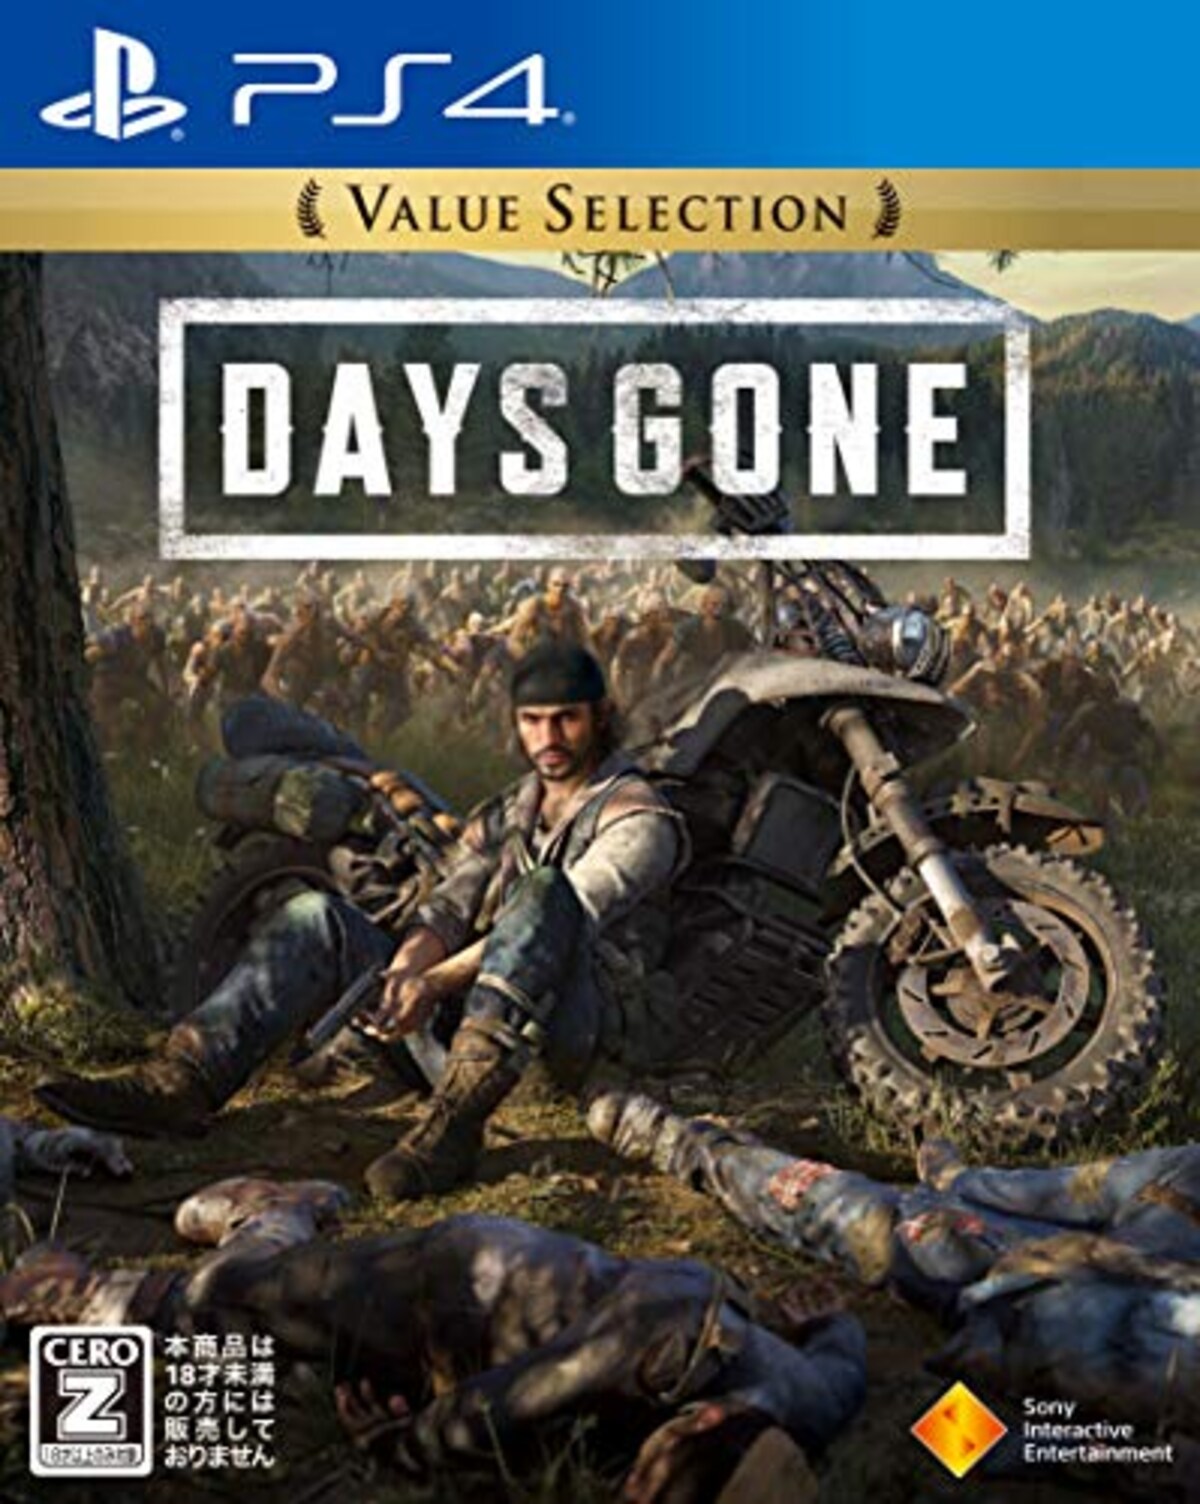 Days Gone（デイズ・ゴーン） Value Selection